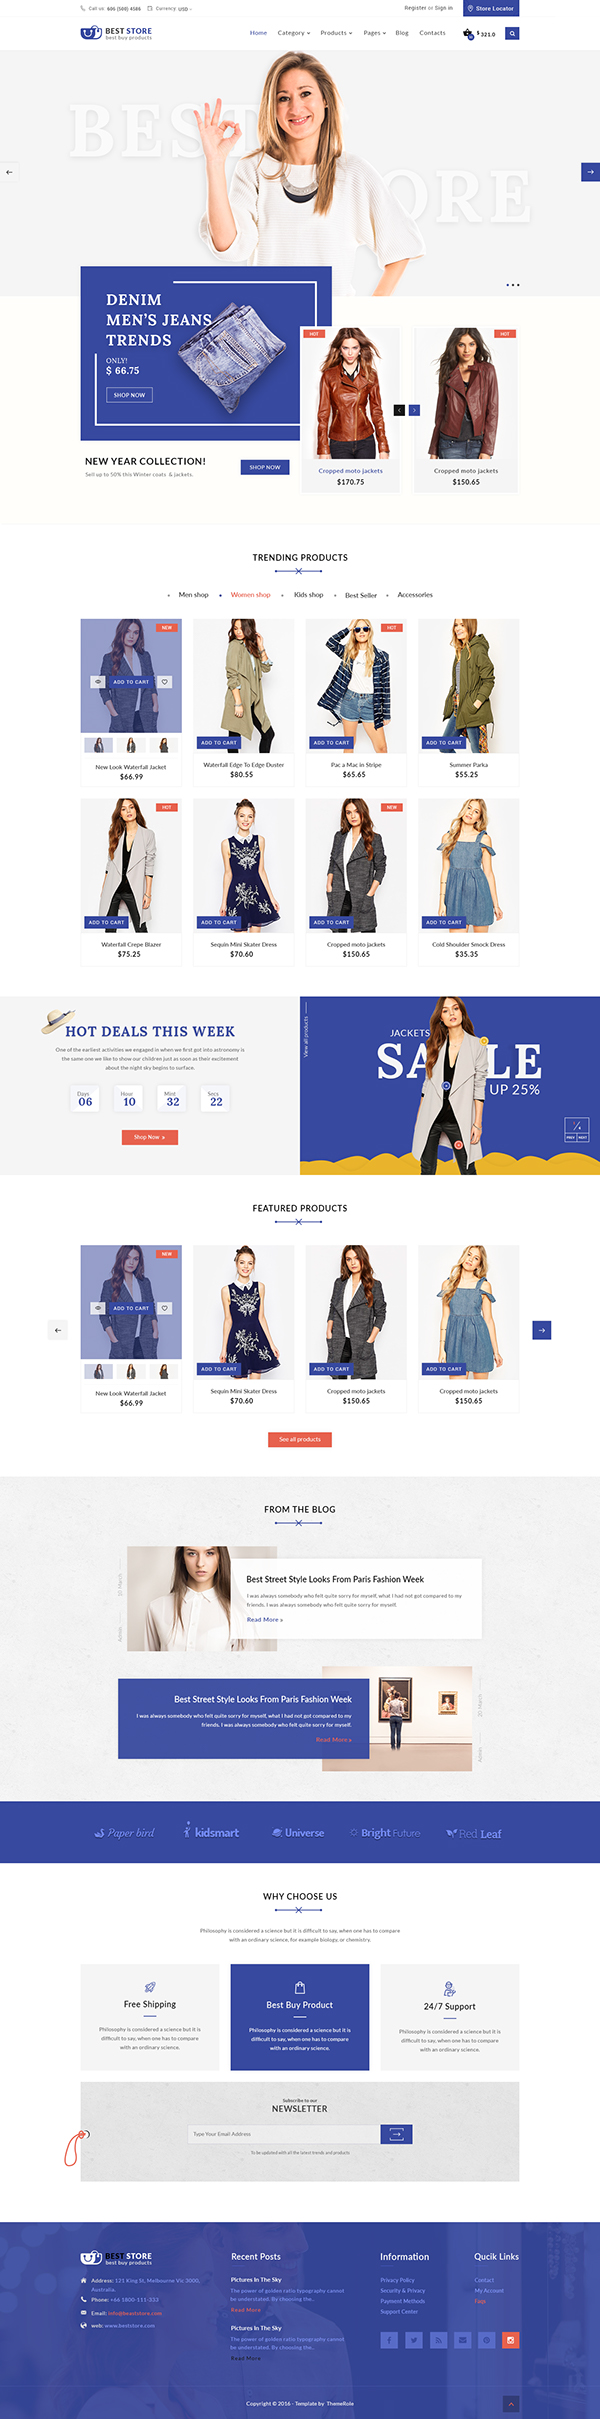 Best-Store – ecommerce PSD template! on Behance